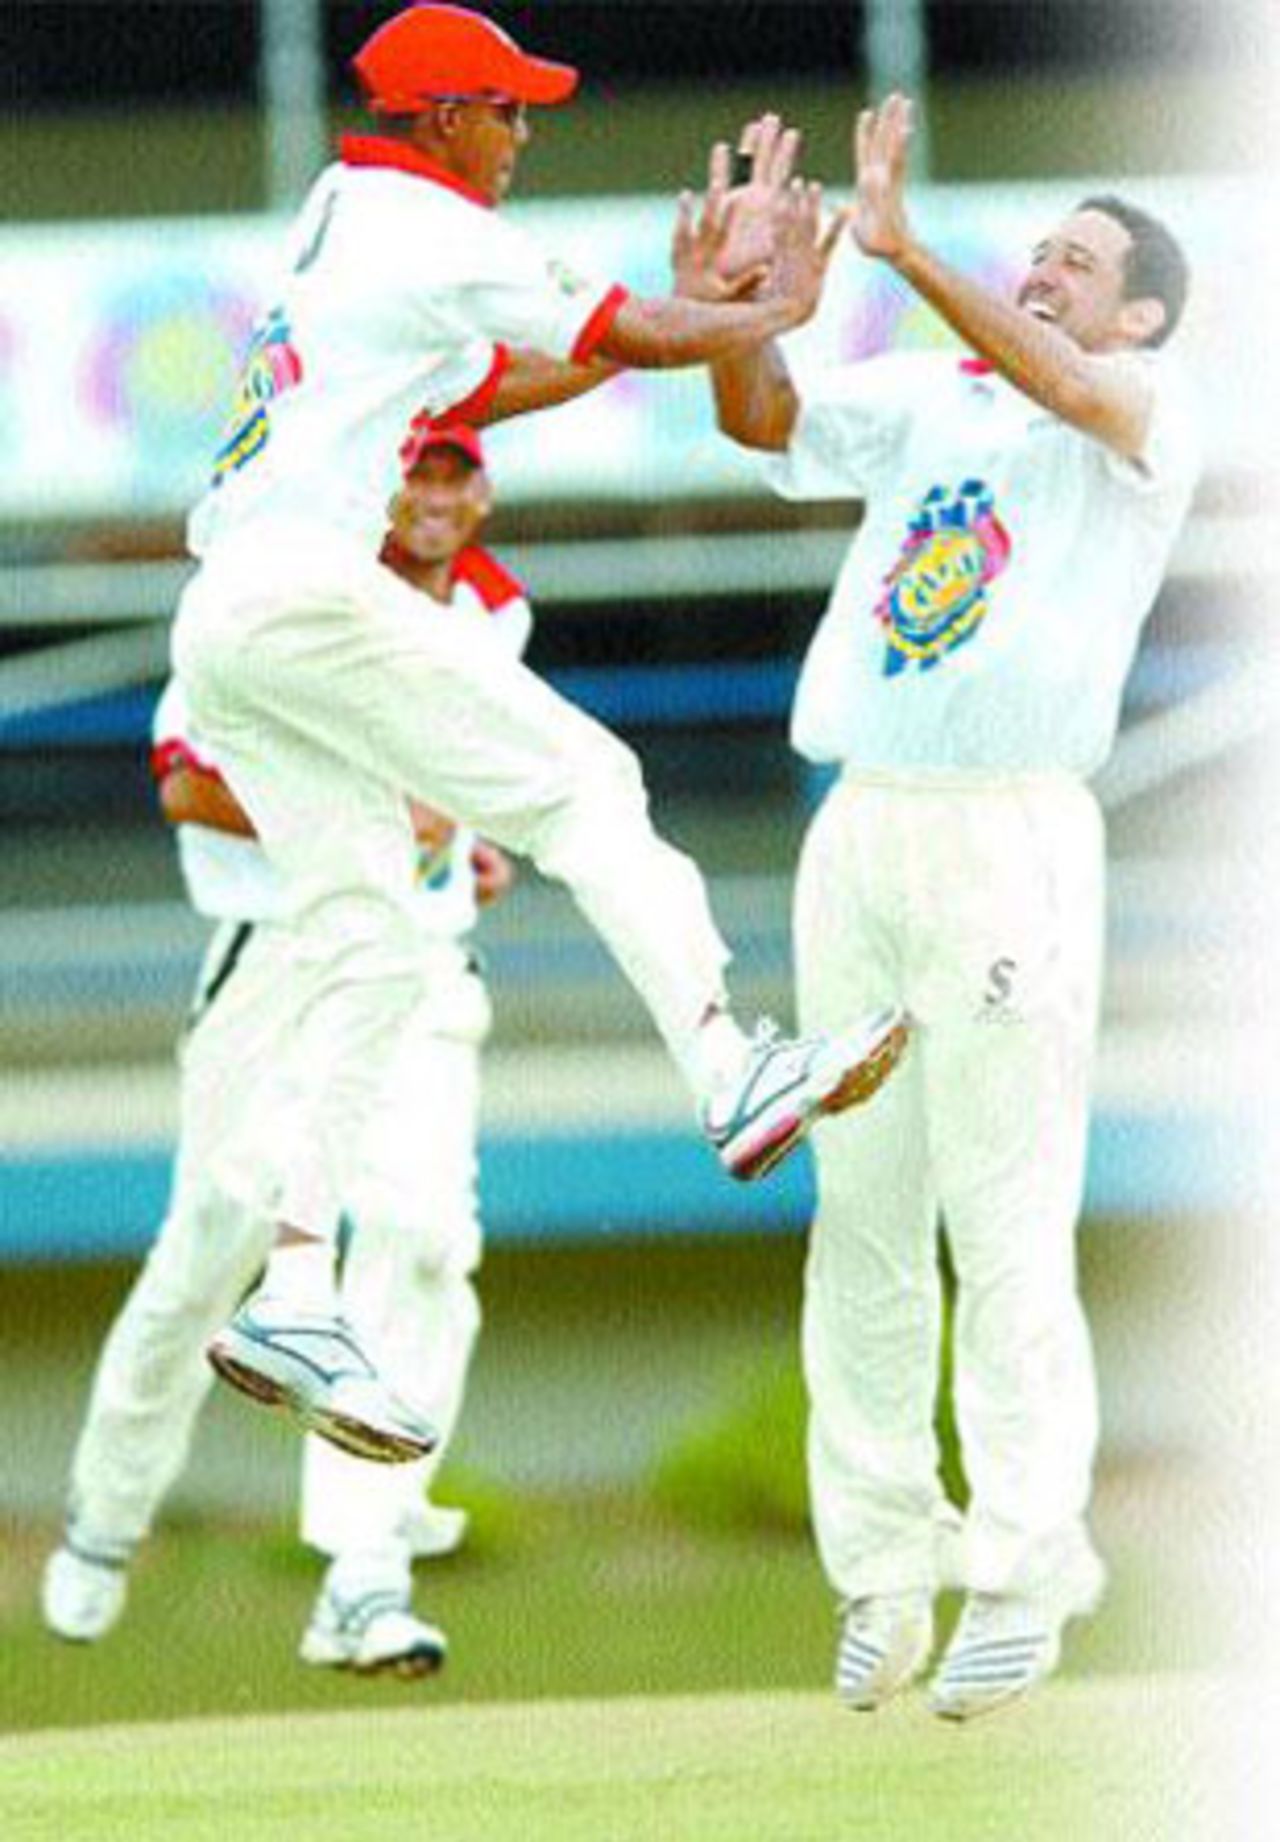 Lendl Simmons leaps high to celebrate the wicket of Sewnarine Chattergoon, Trinidad & Tobago v  Guyana, Carib Beer Series, Port of Spain, January 6, 2007